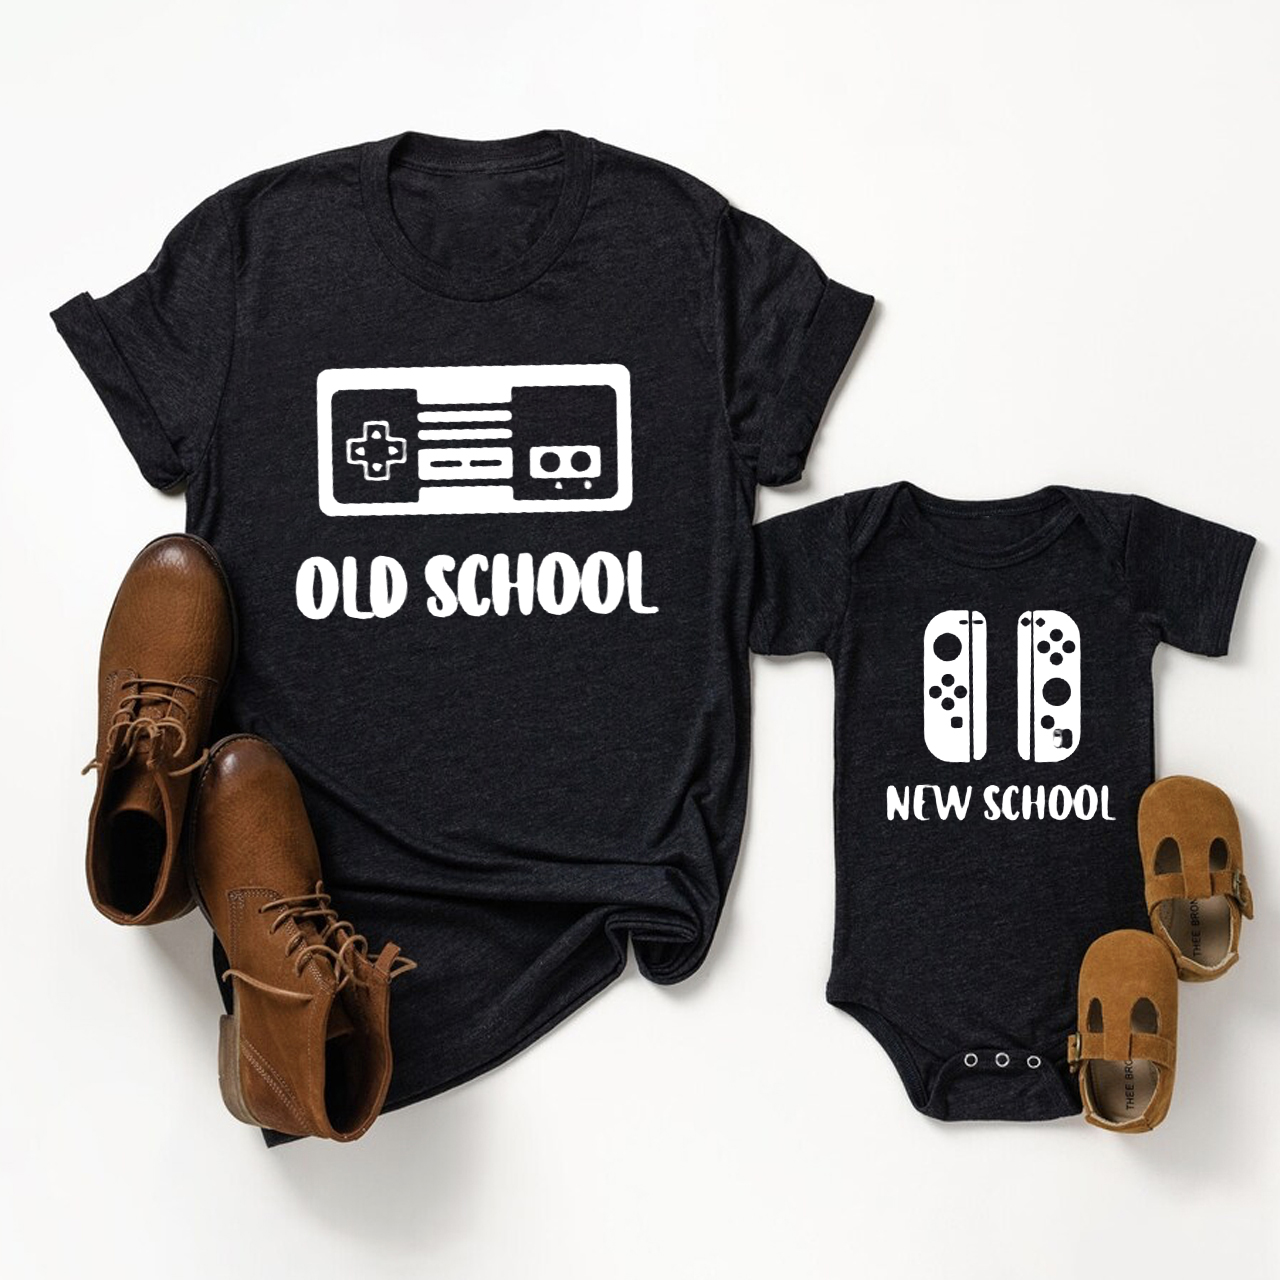 Old School & New School Matching Tees For Father's Day